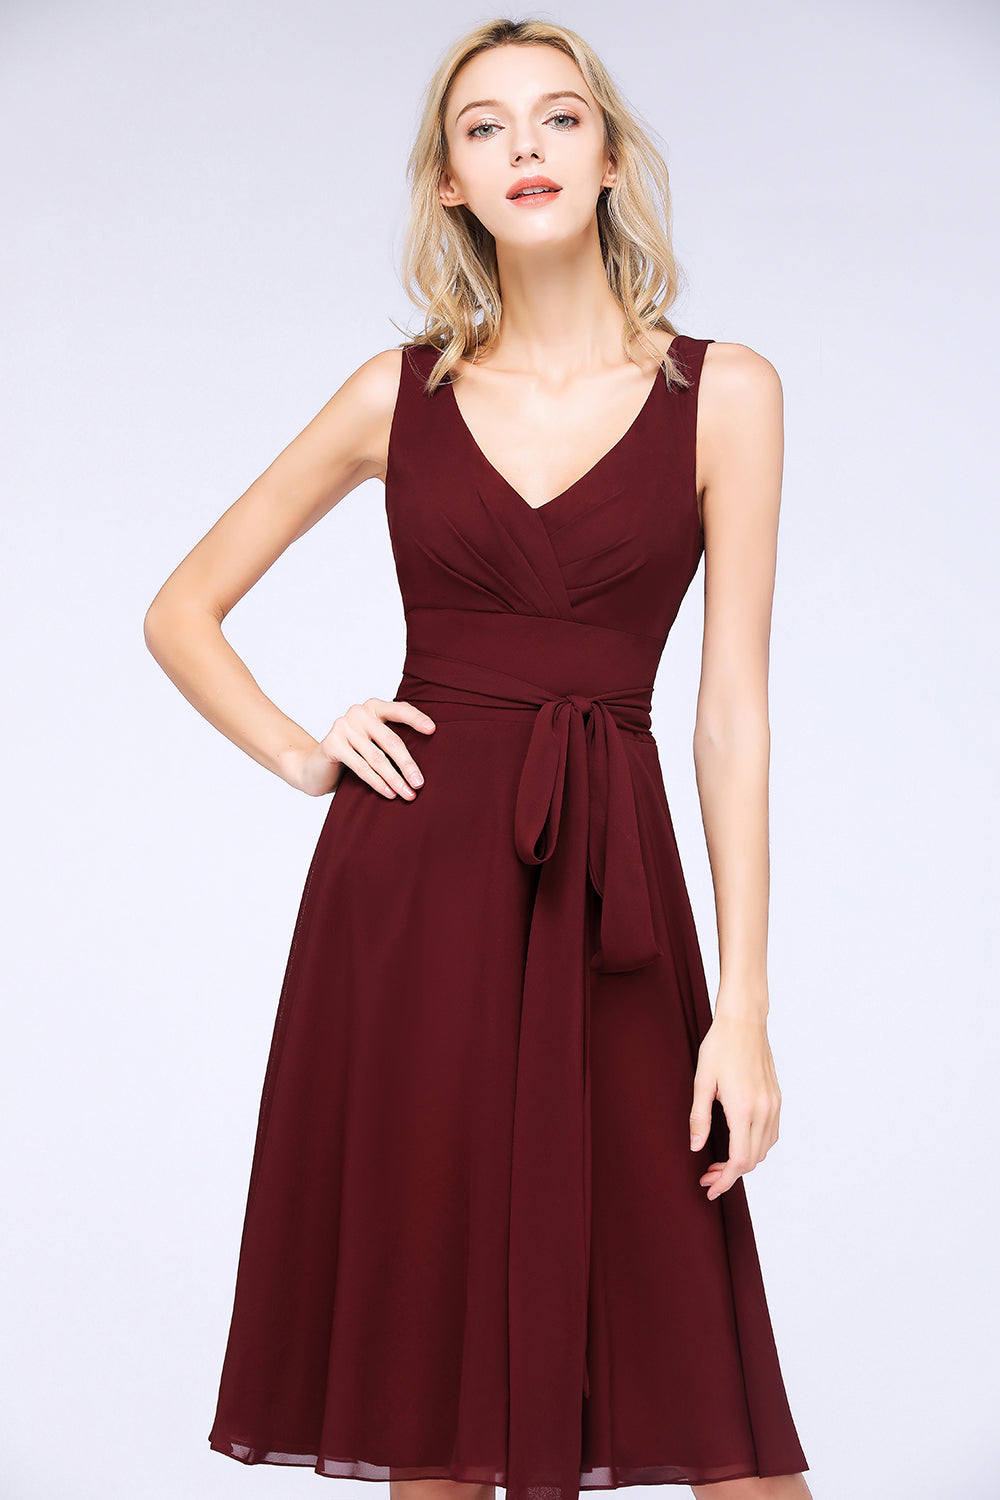 Load image into Gallery viewer, A-Line Chiffon Straps V-Neck Short Bridesmaid Dress with Bow Sash-BIZTUNNEL
